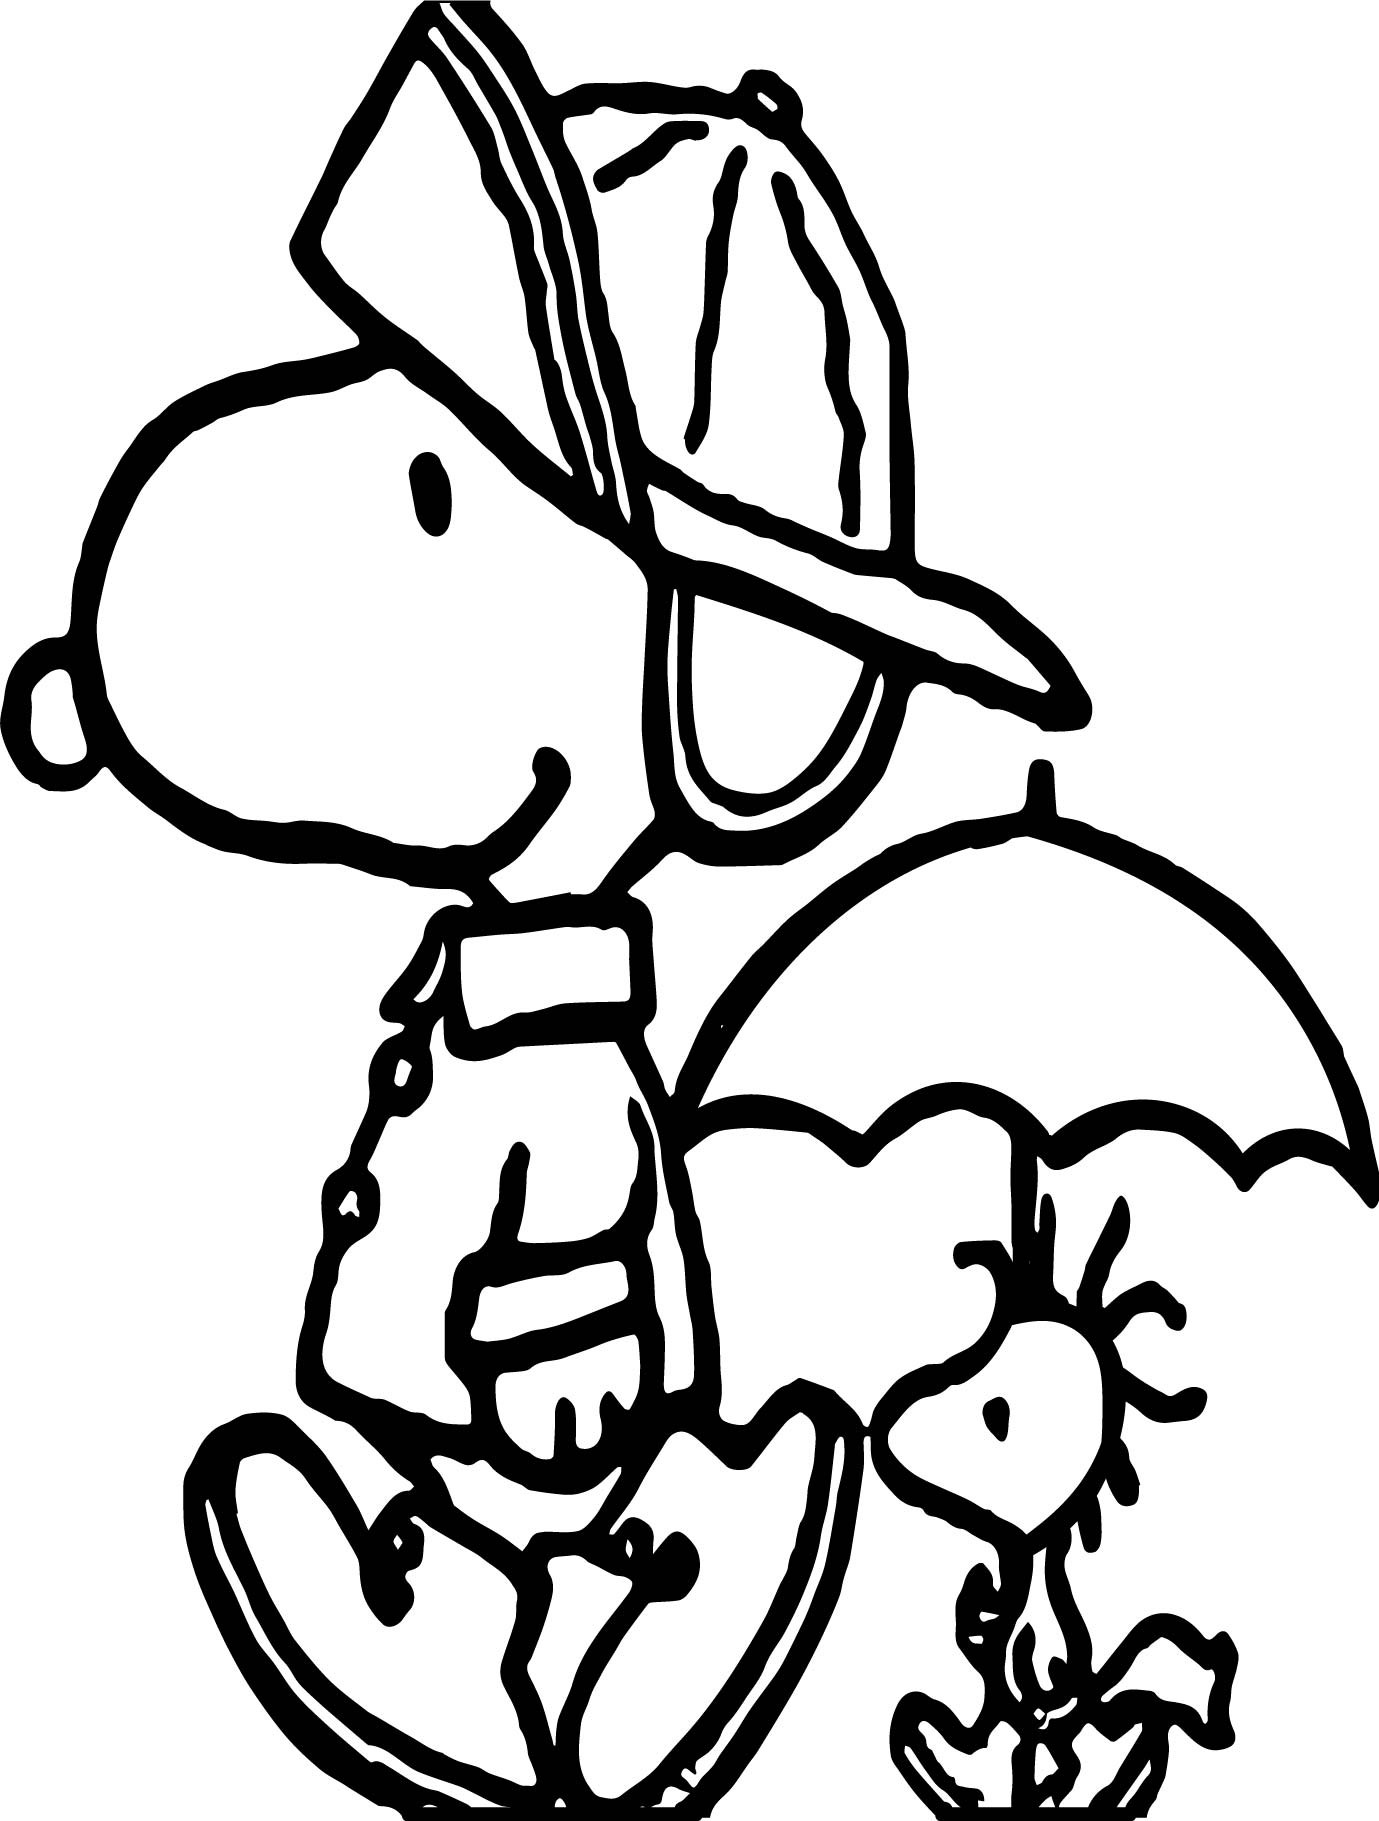 April Showers Coloring Pages
 April Shower Snoopy Coloring Page